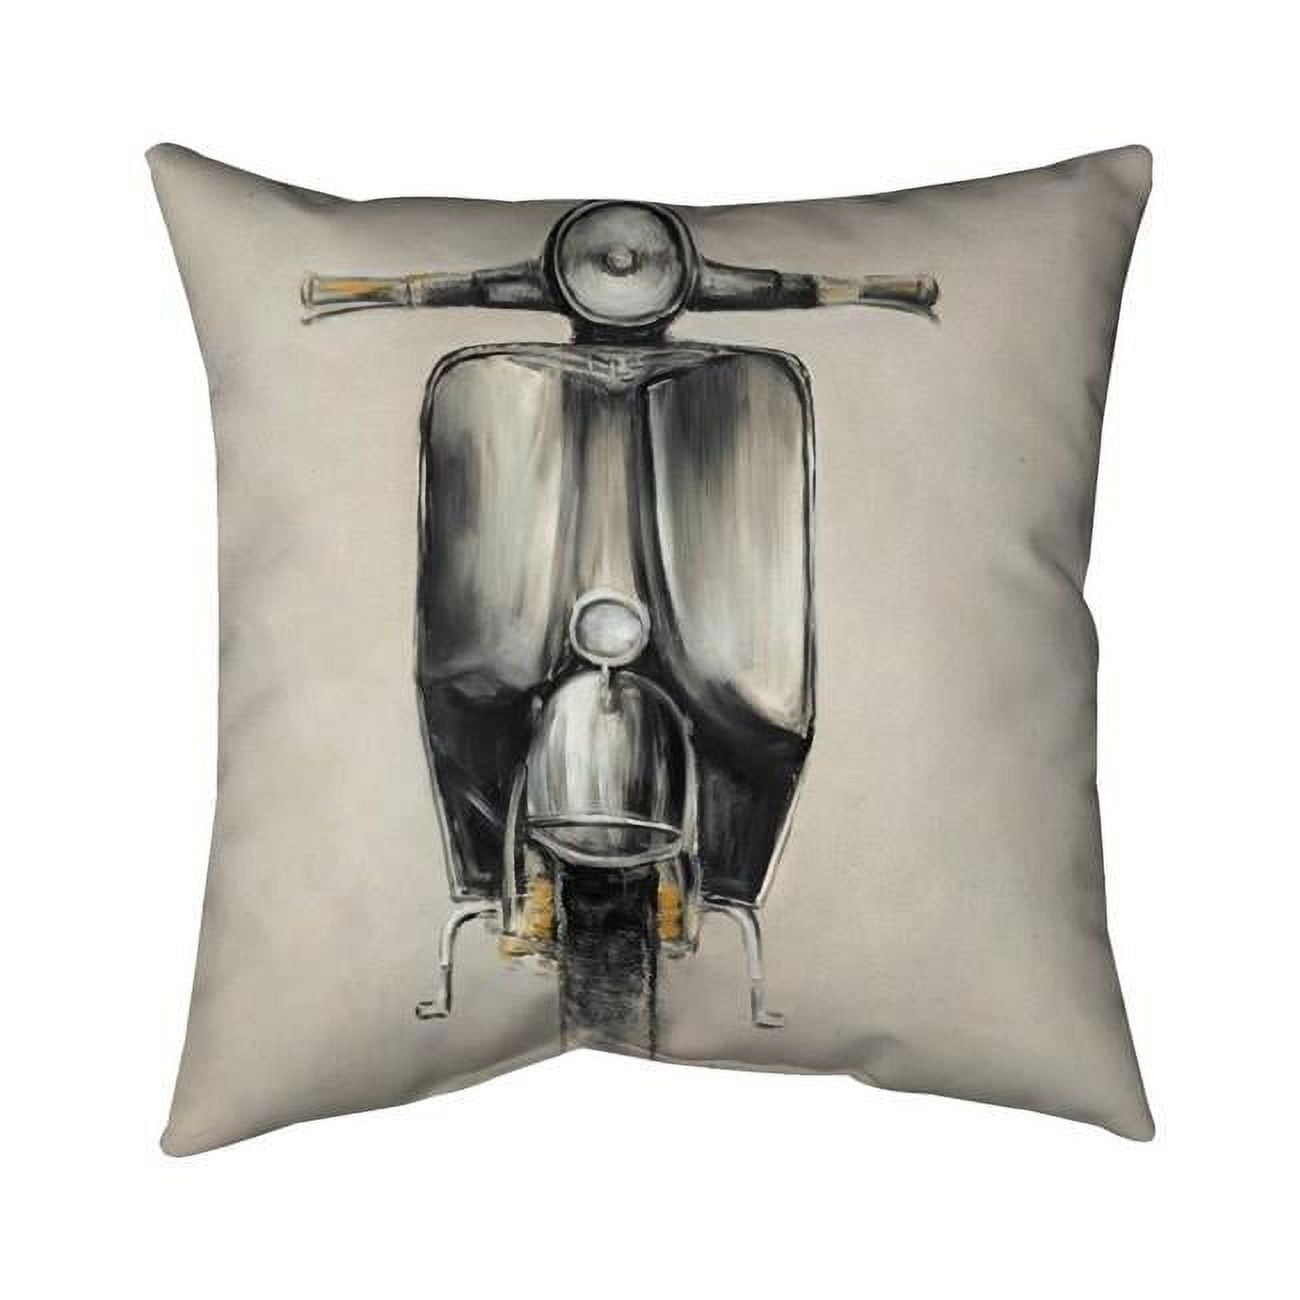 Begin Home Decor 5543-1818-TR49 18 x 18 in. Small Black Moped-Double Sided Print Indoor Pillow Cover